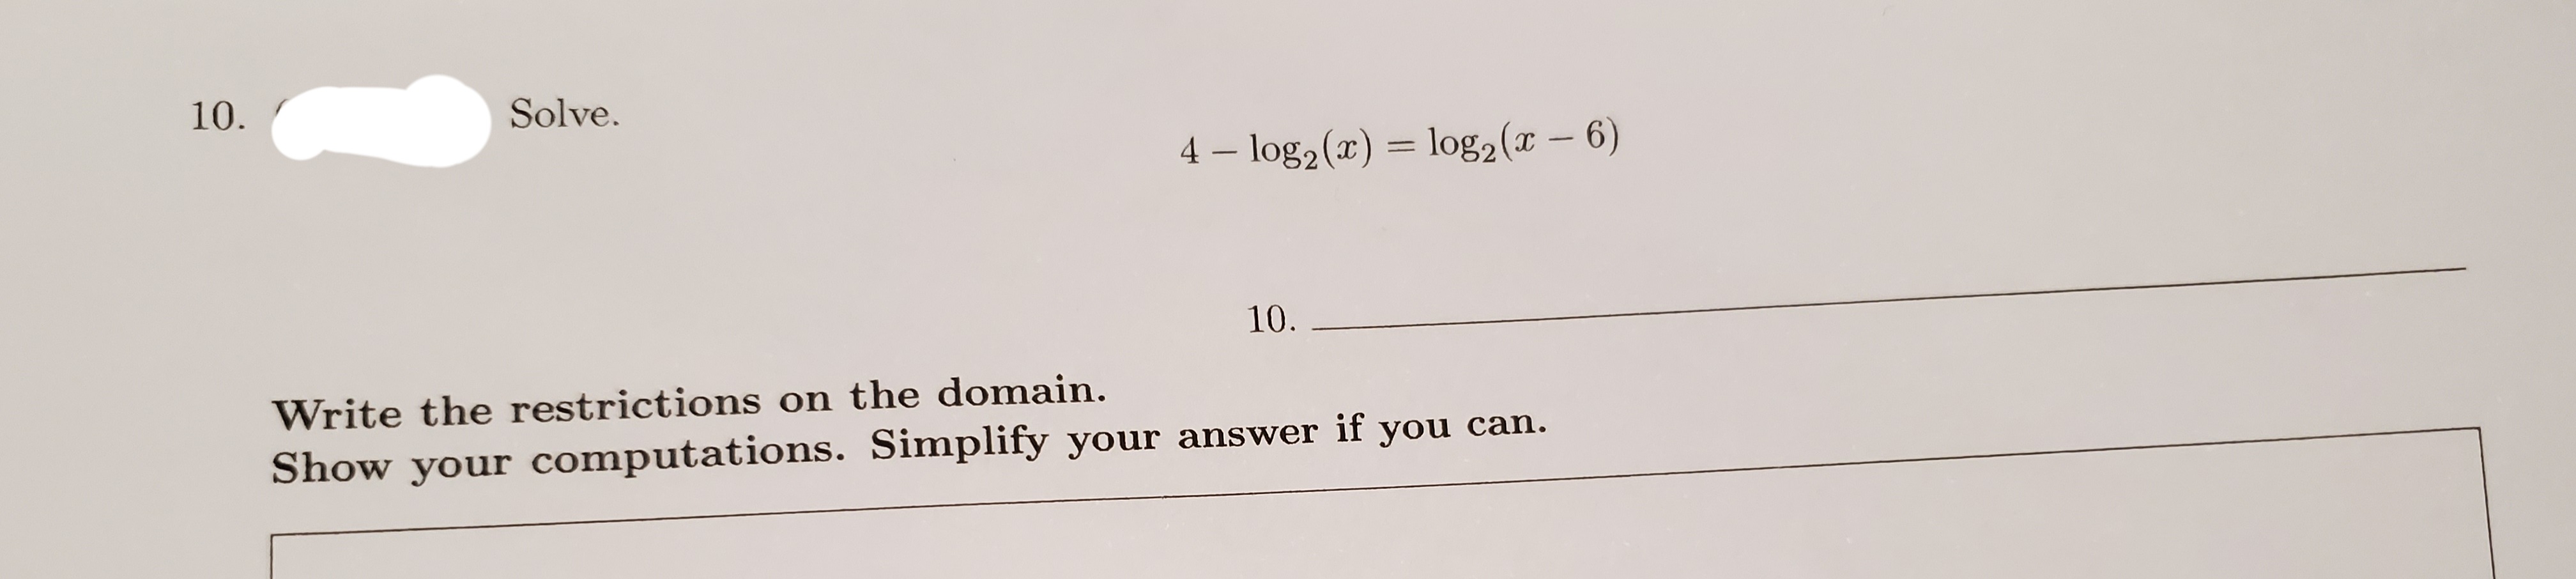 10.
Solve.
4 – log2(x) = log2(x - 6)
10.
Write the restrictions on the domain.
Show your computations. Simplify your answer if you can.
